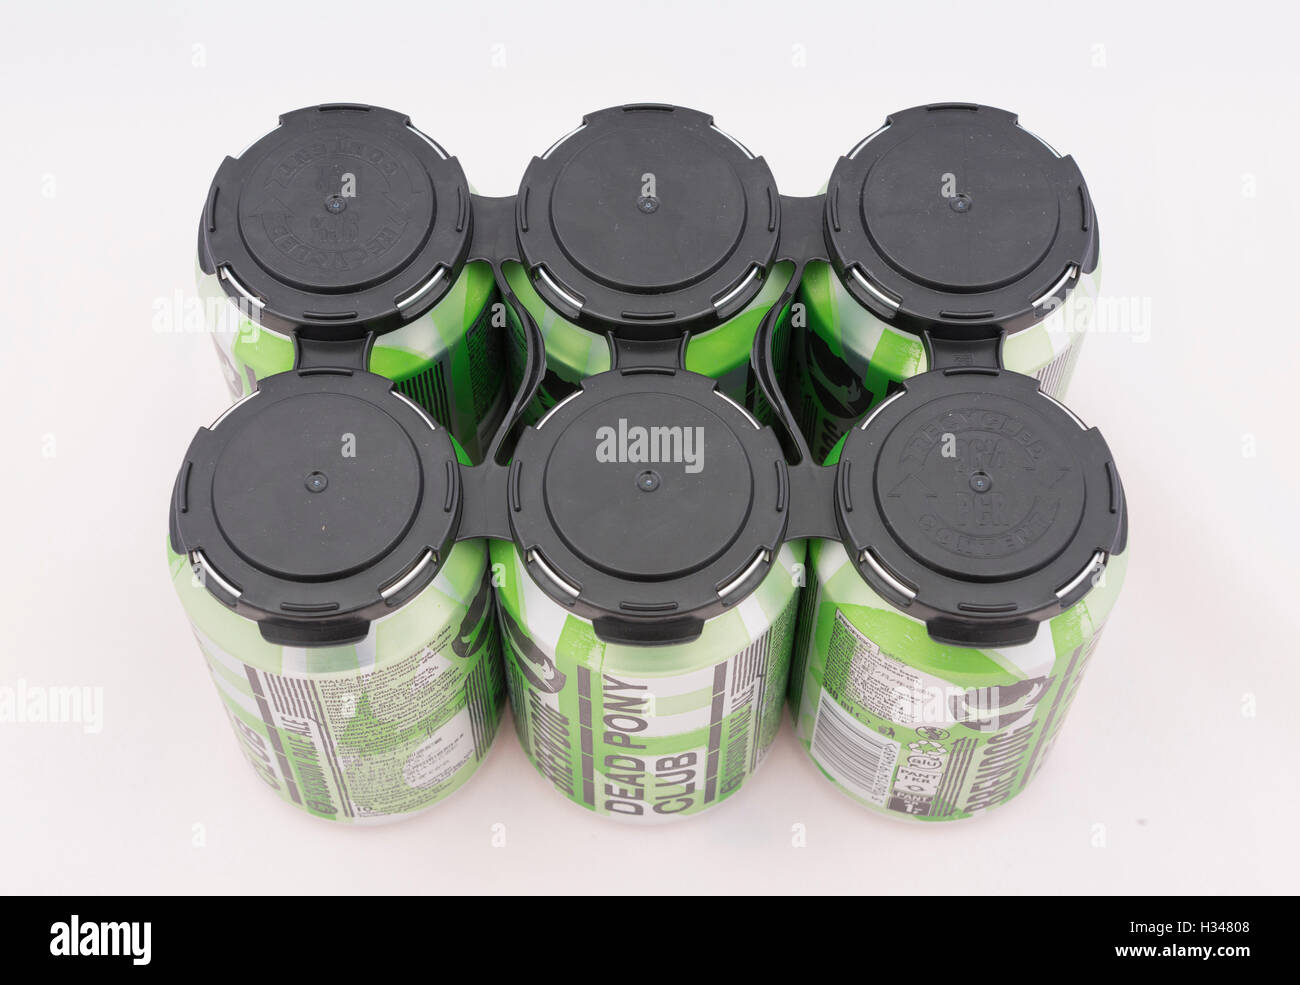 Cans of BrewDog 'Dead Pony Club' beer with PakTech holder. Stock Photo